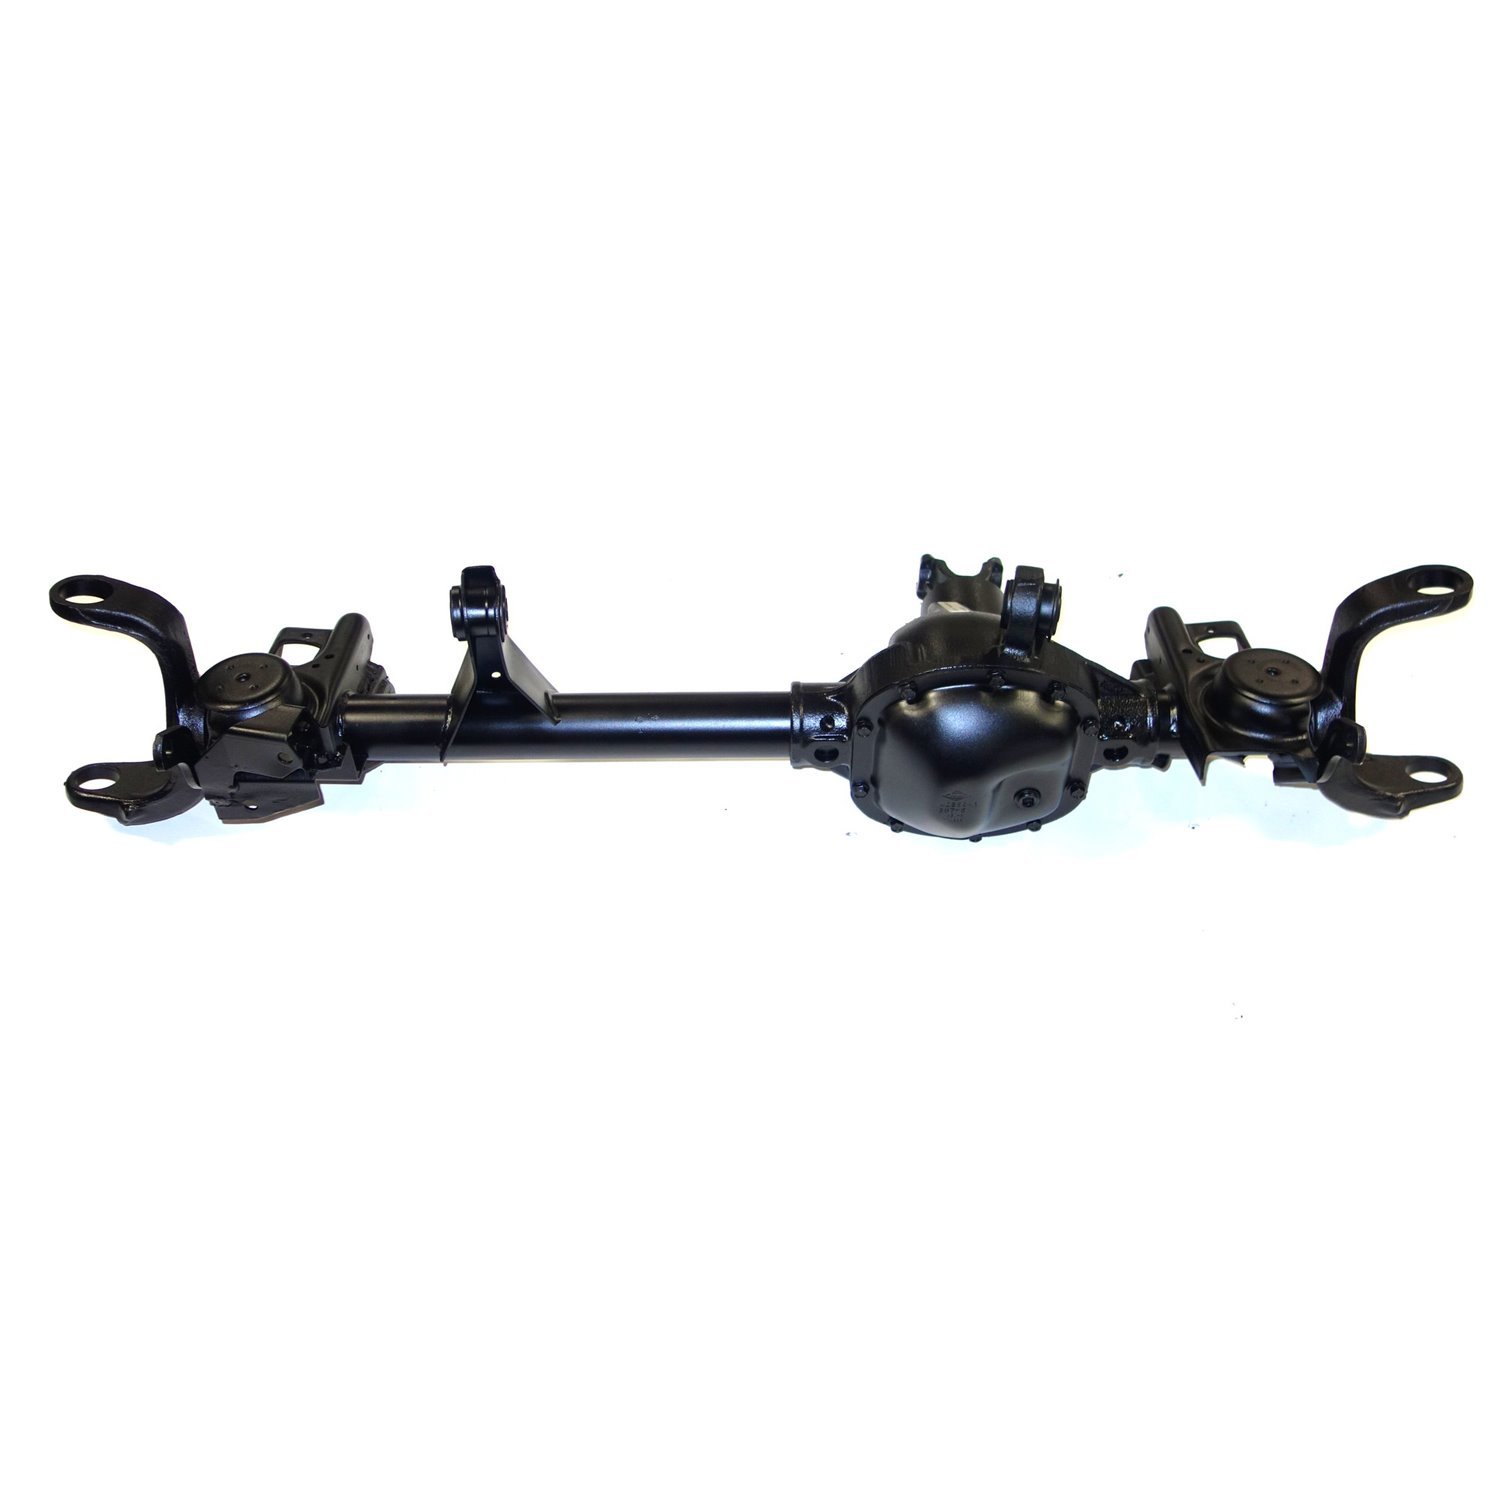 Remanufactured Complete Axle Assembly for Dana 30 09-10 Jeep Wrangler LHD, 3.21 Ratio